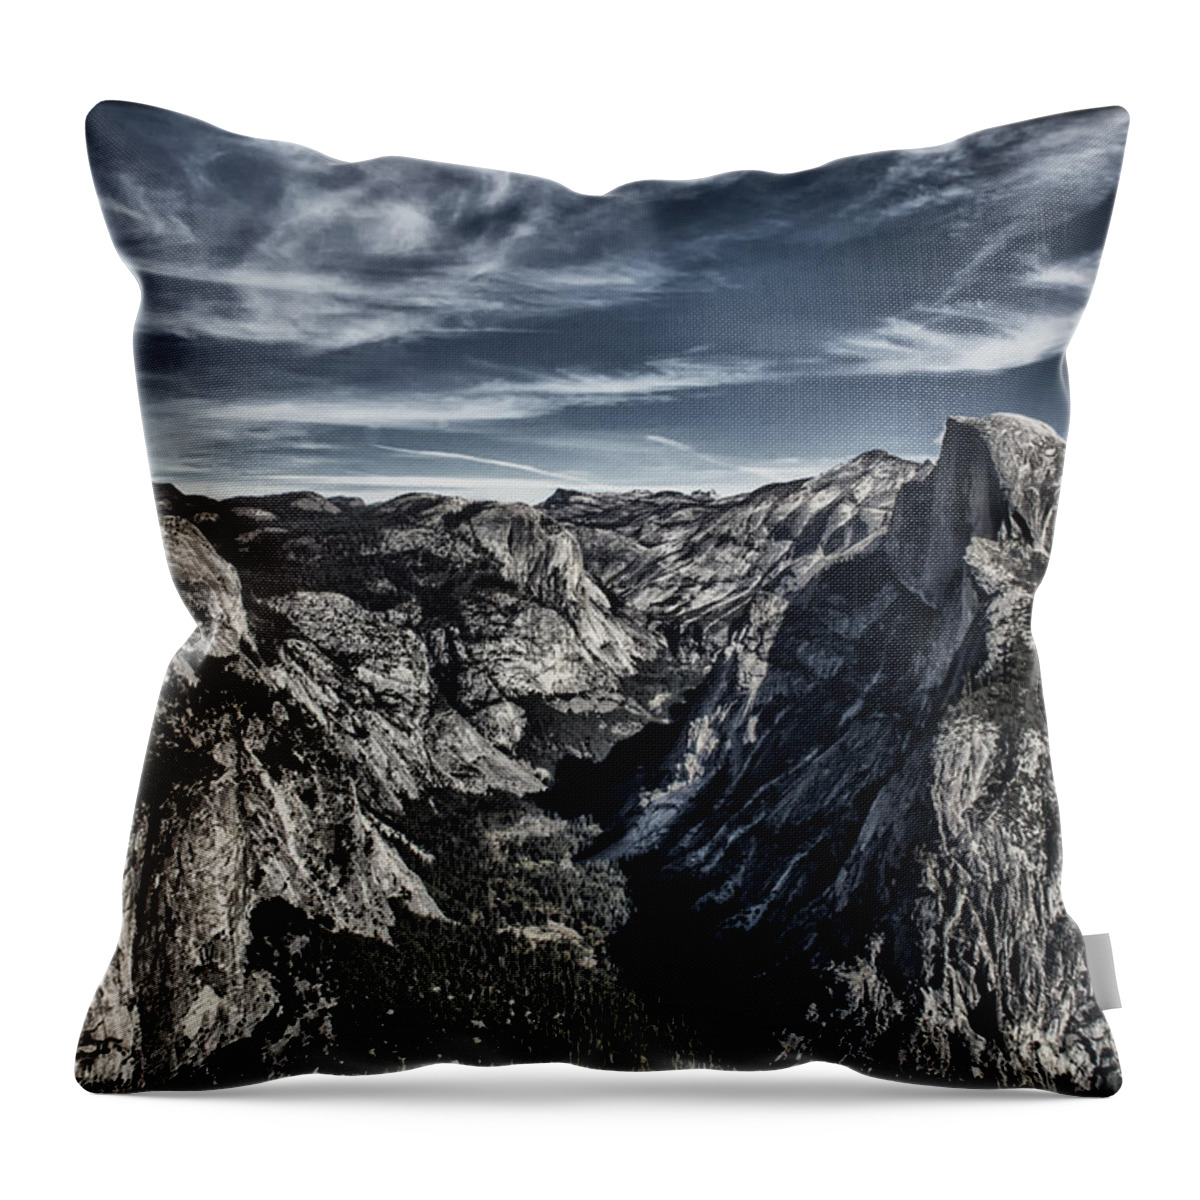 California Throw Pillow featuring the photograph Half Dome by Erika Fawcett